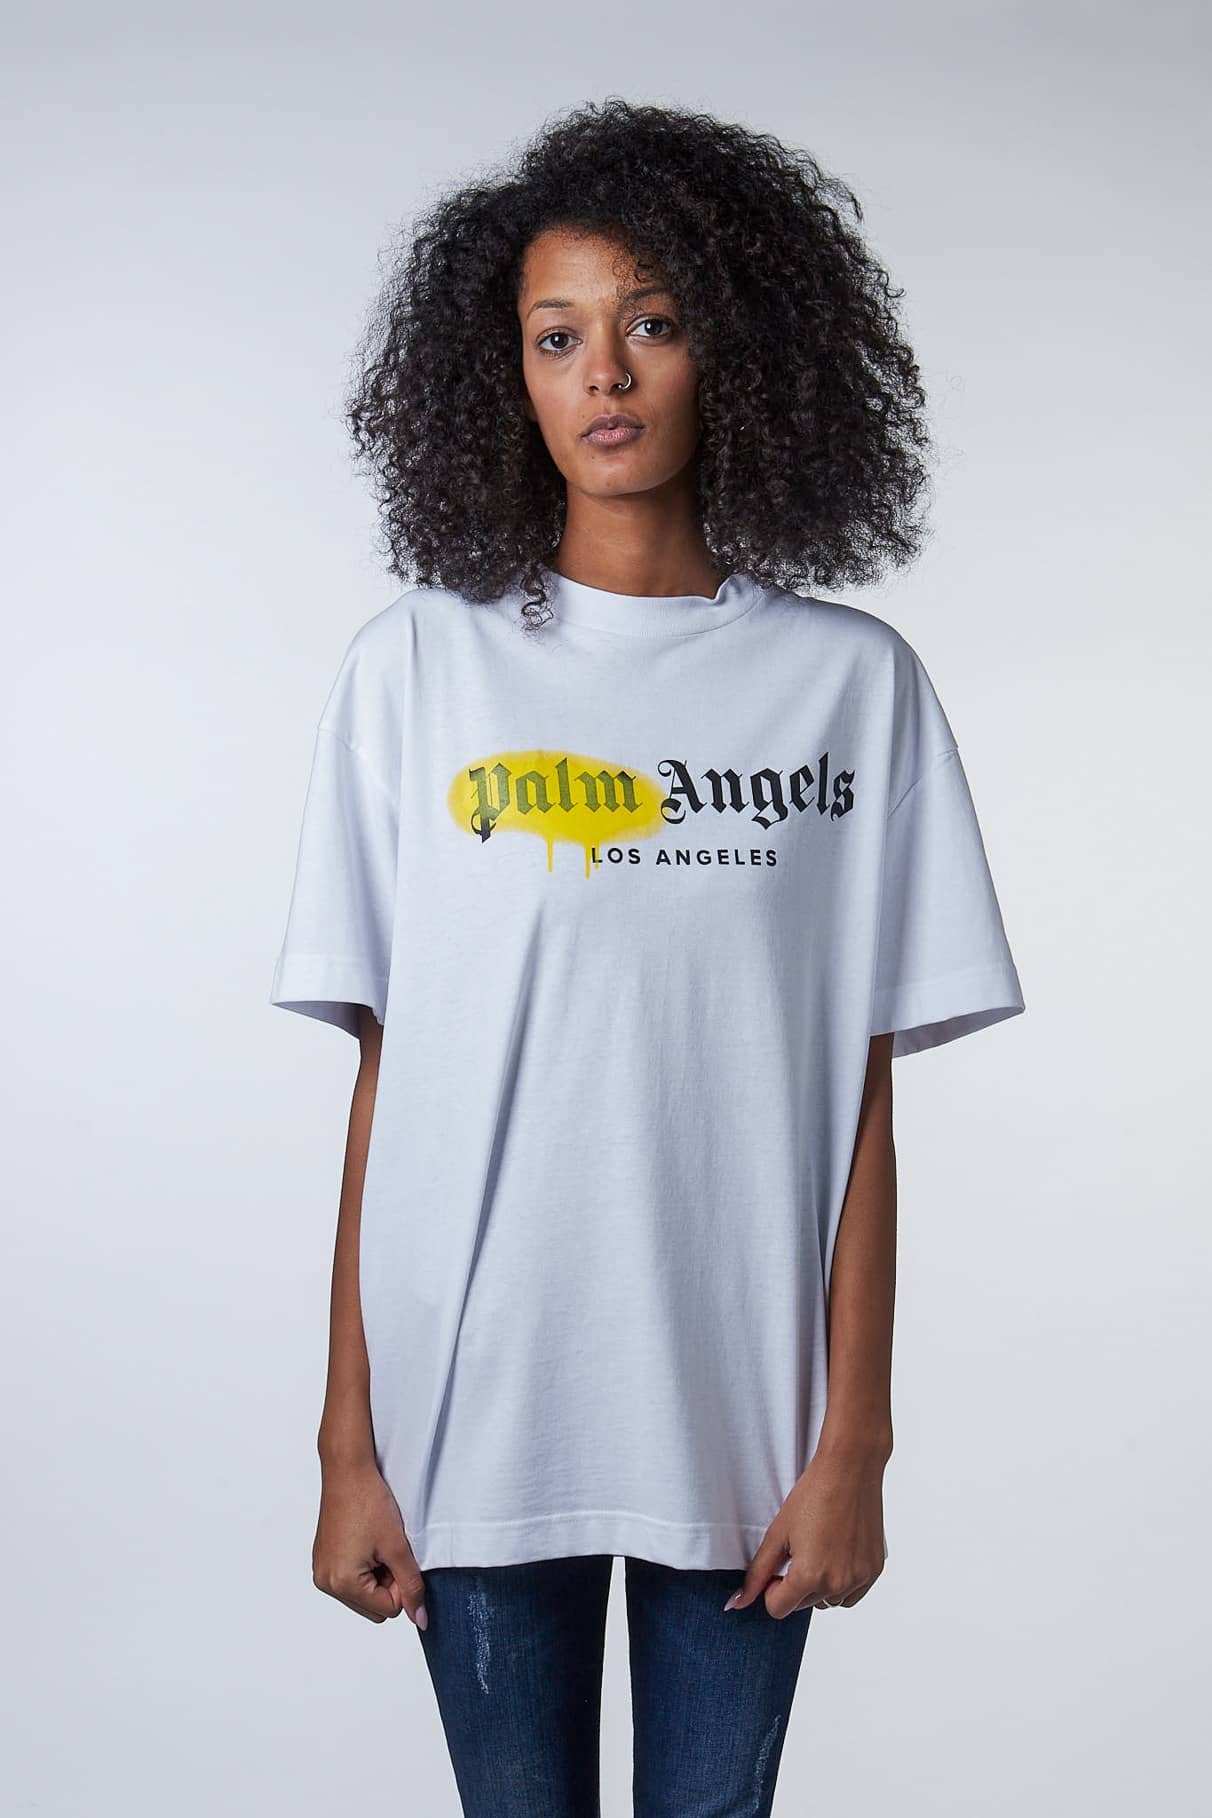 PALM ANGELS T-SHIRT PPMAA001F20JER0160118 WHITE/ YELLOW